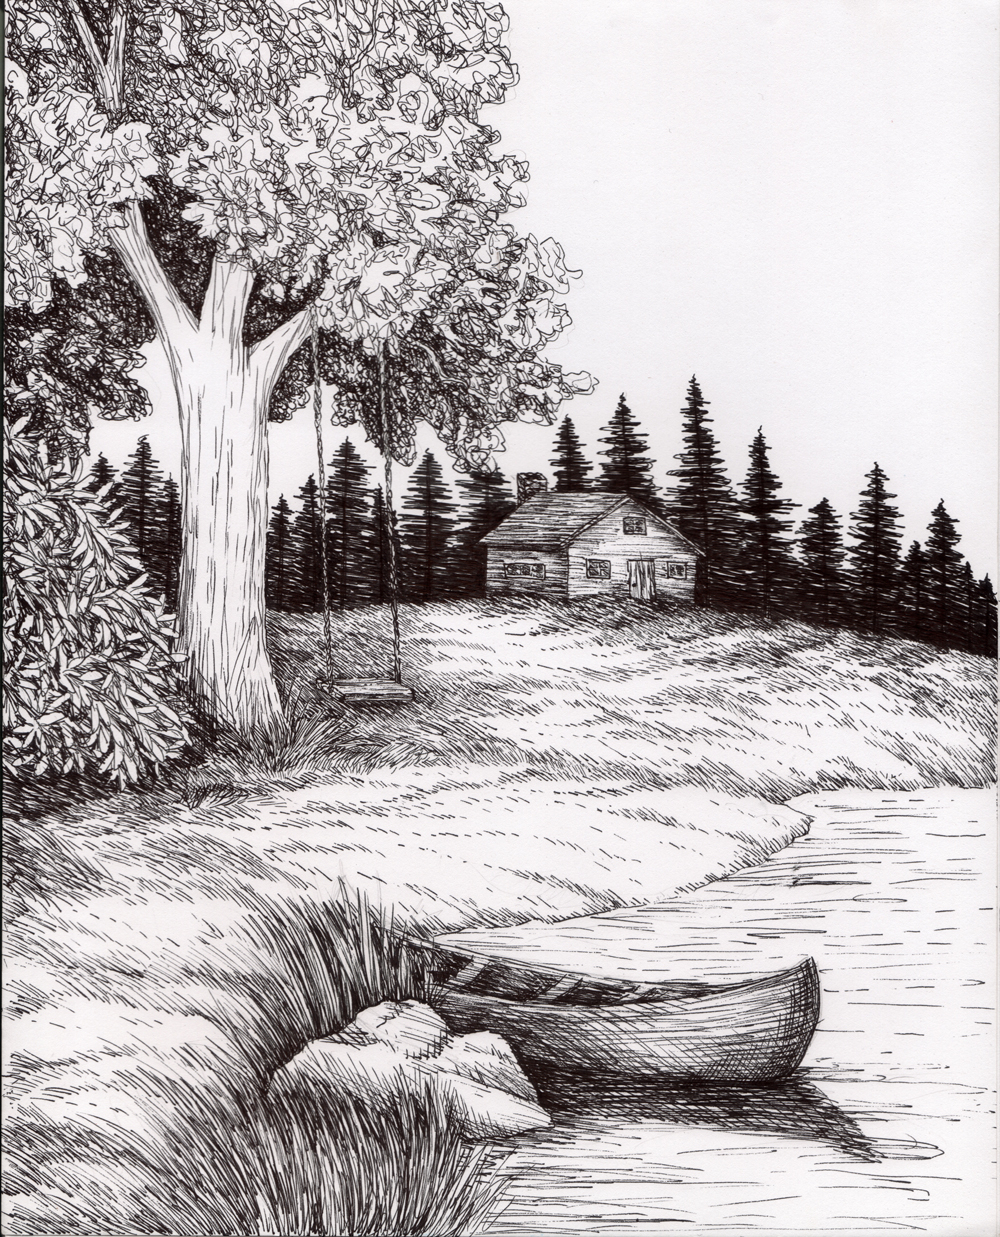 Natural Scenery Pencil Drawing Images scenery